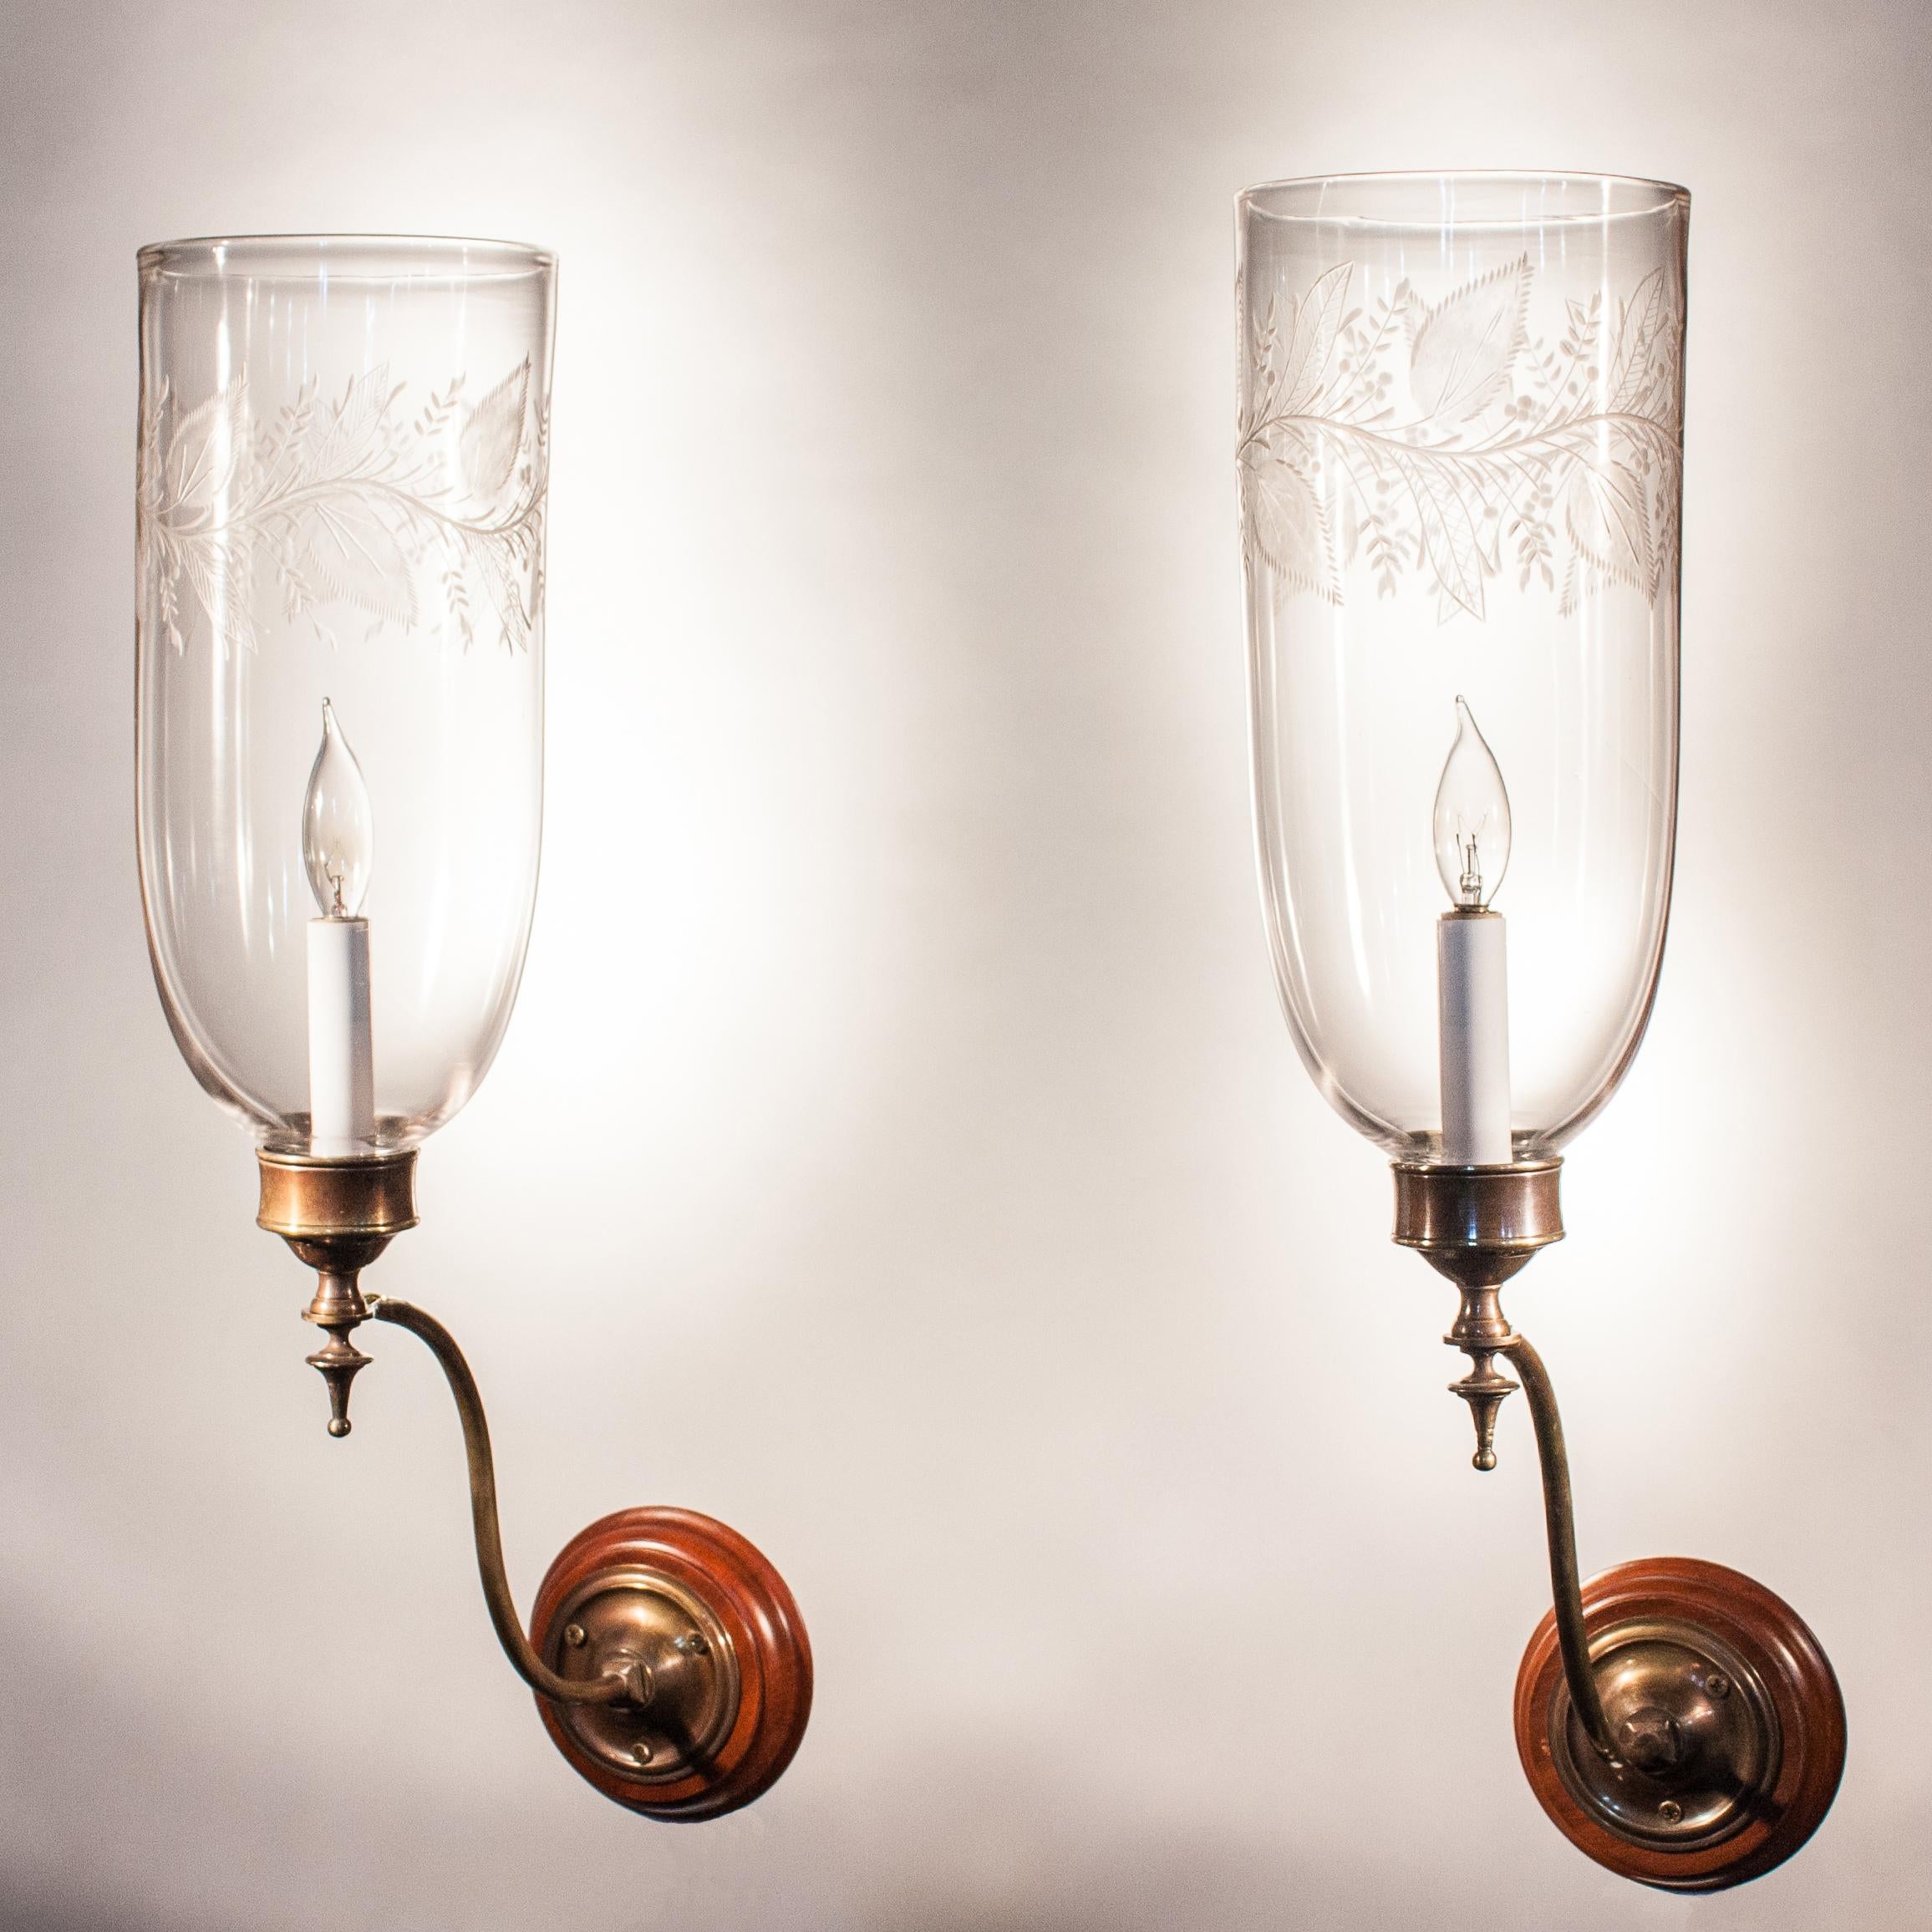 A pair of clear, hand blown glass hurricane shades manufactured by F.&C. Osler, England, circa 1880. The excellent quality shades have attractive lines that are accentuated by the etched leaf motif around the top. Custom-fabricated, Classic brass